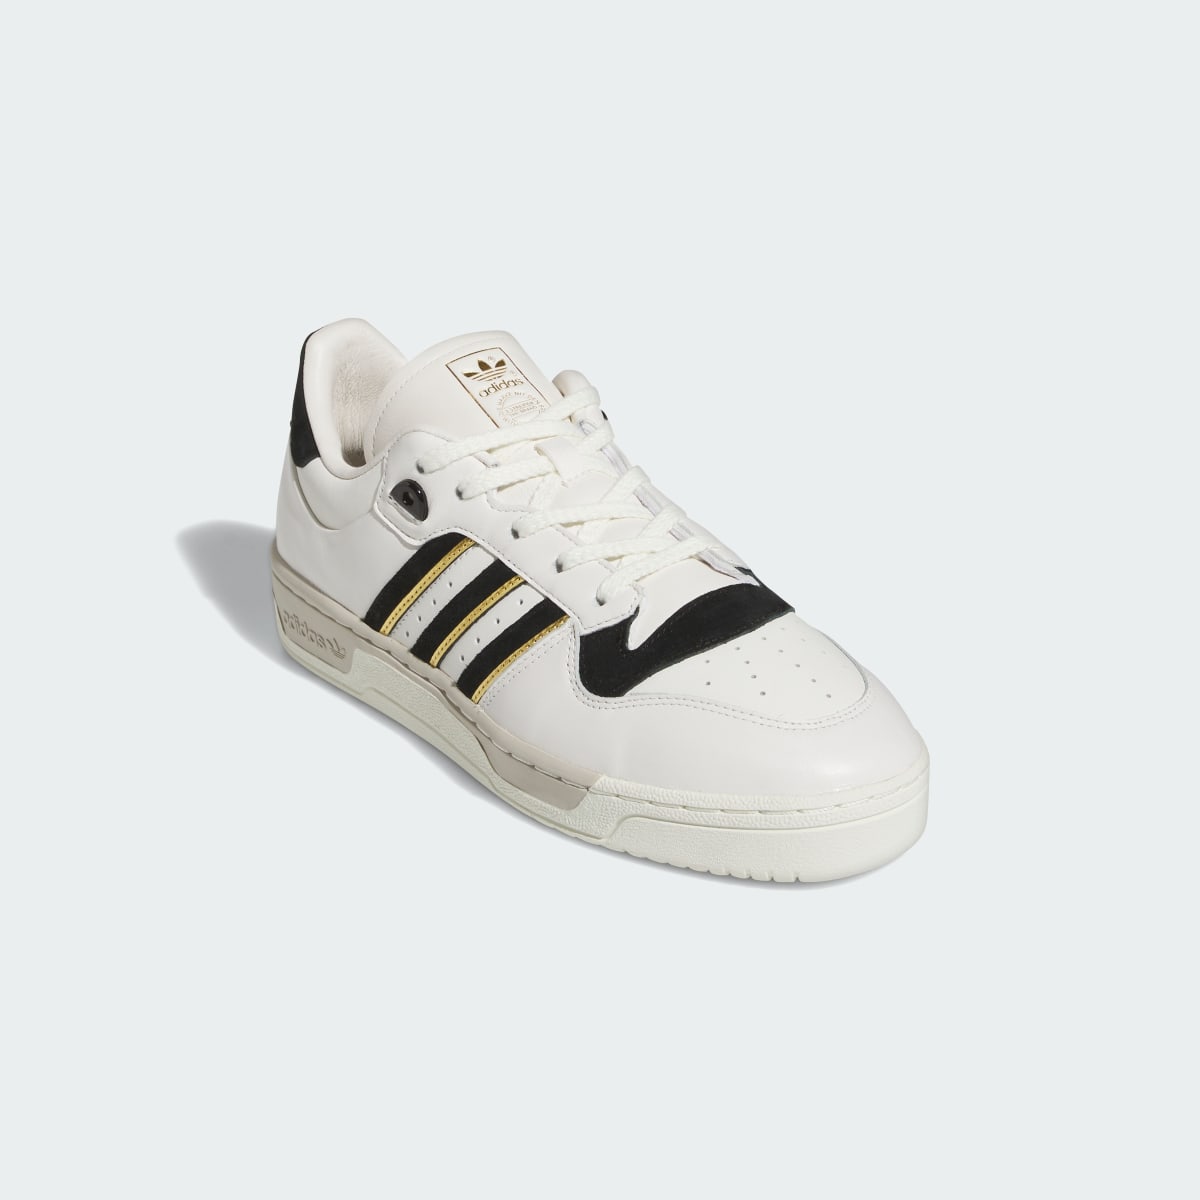 Adidas Rivalry 86 Low Shoes. 5